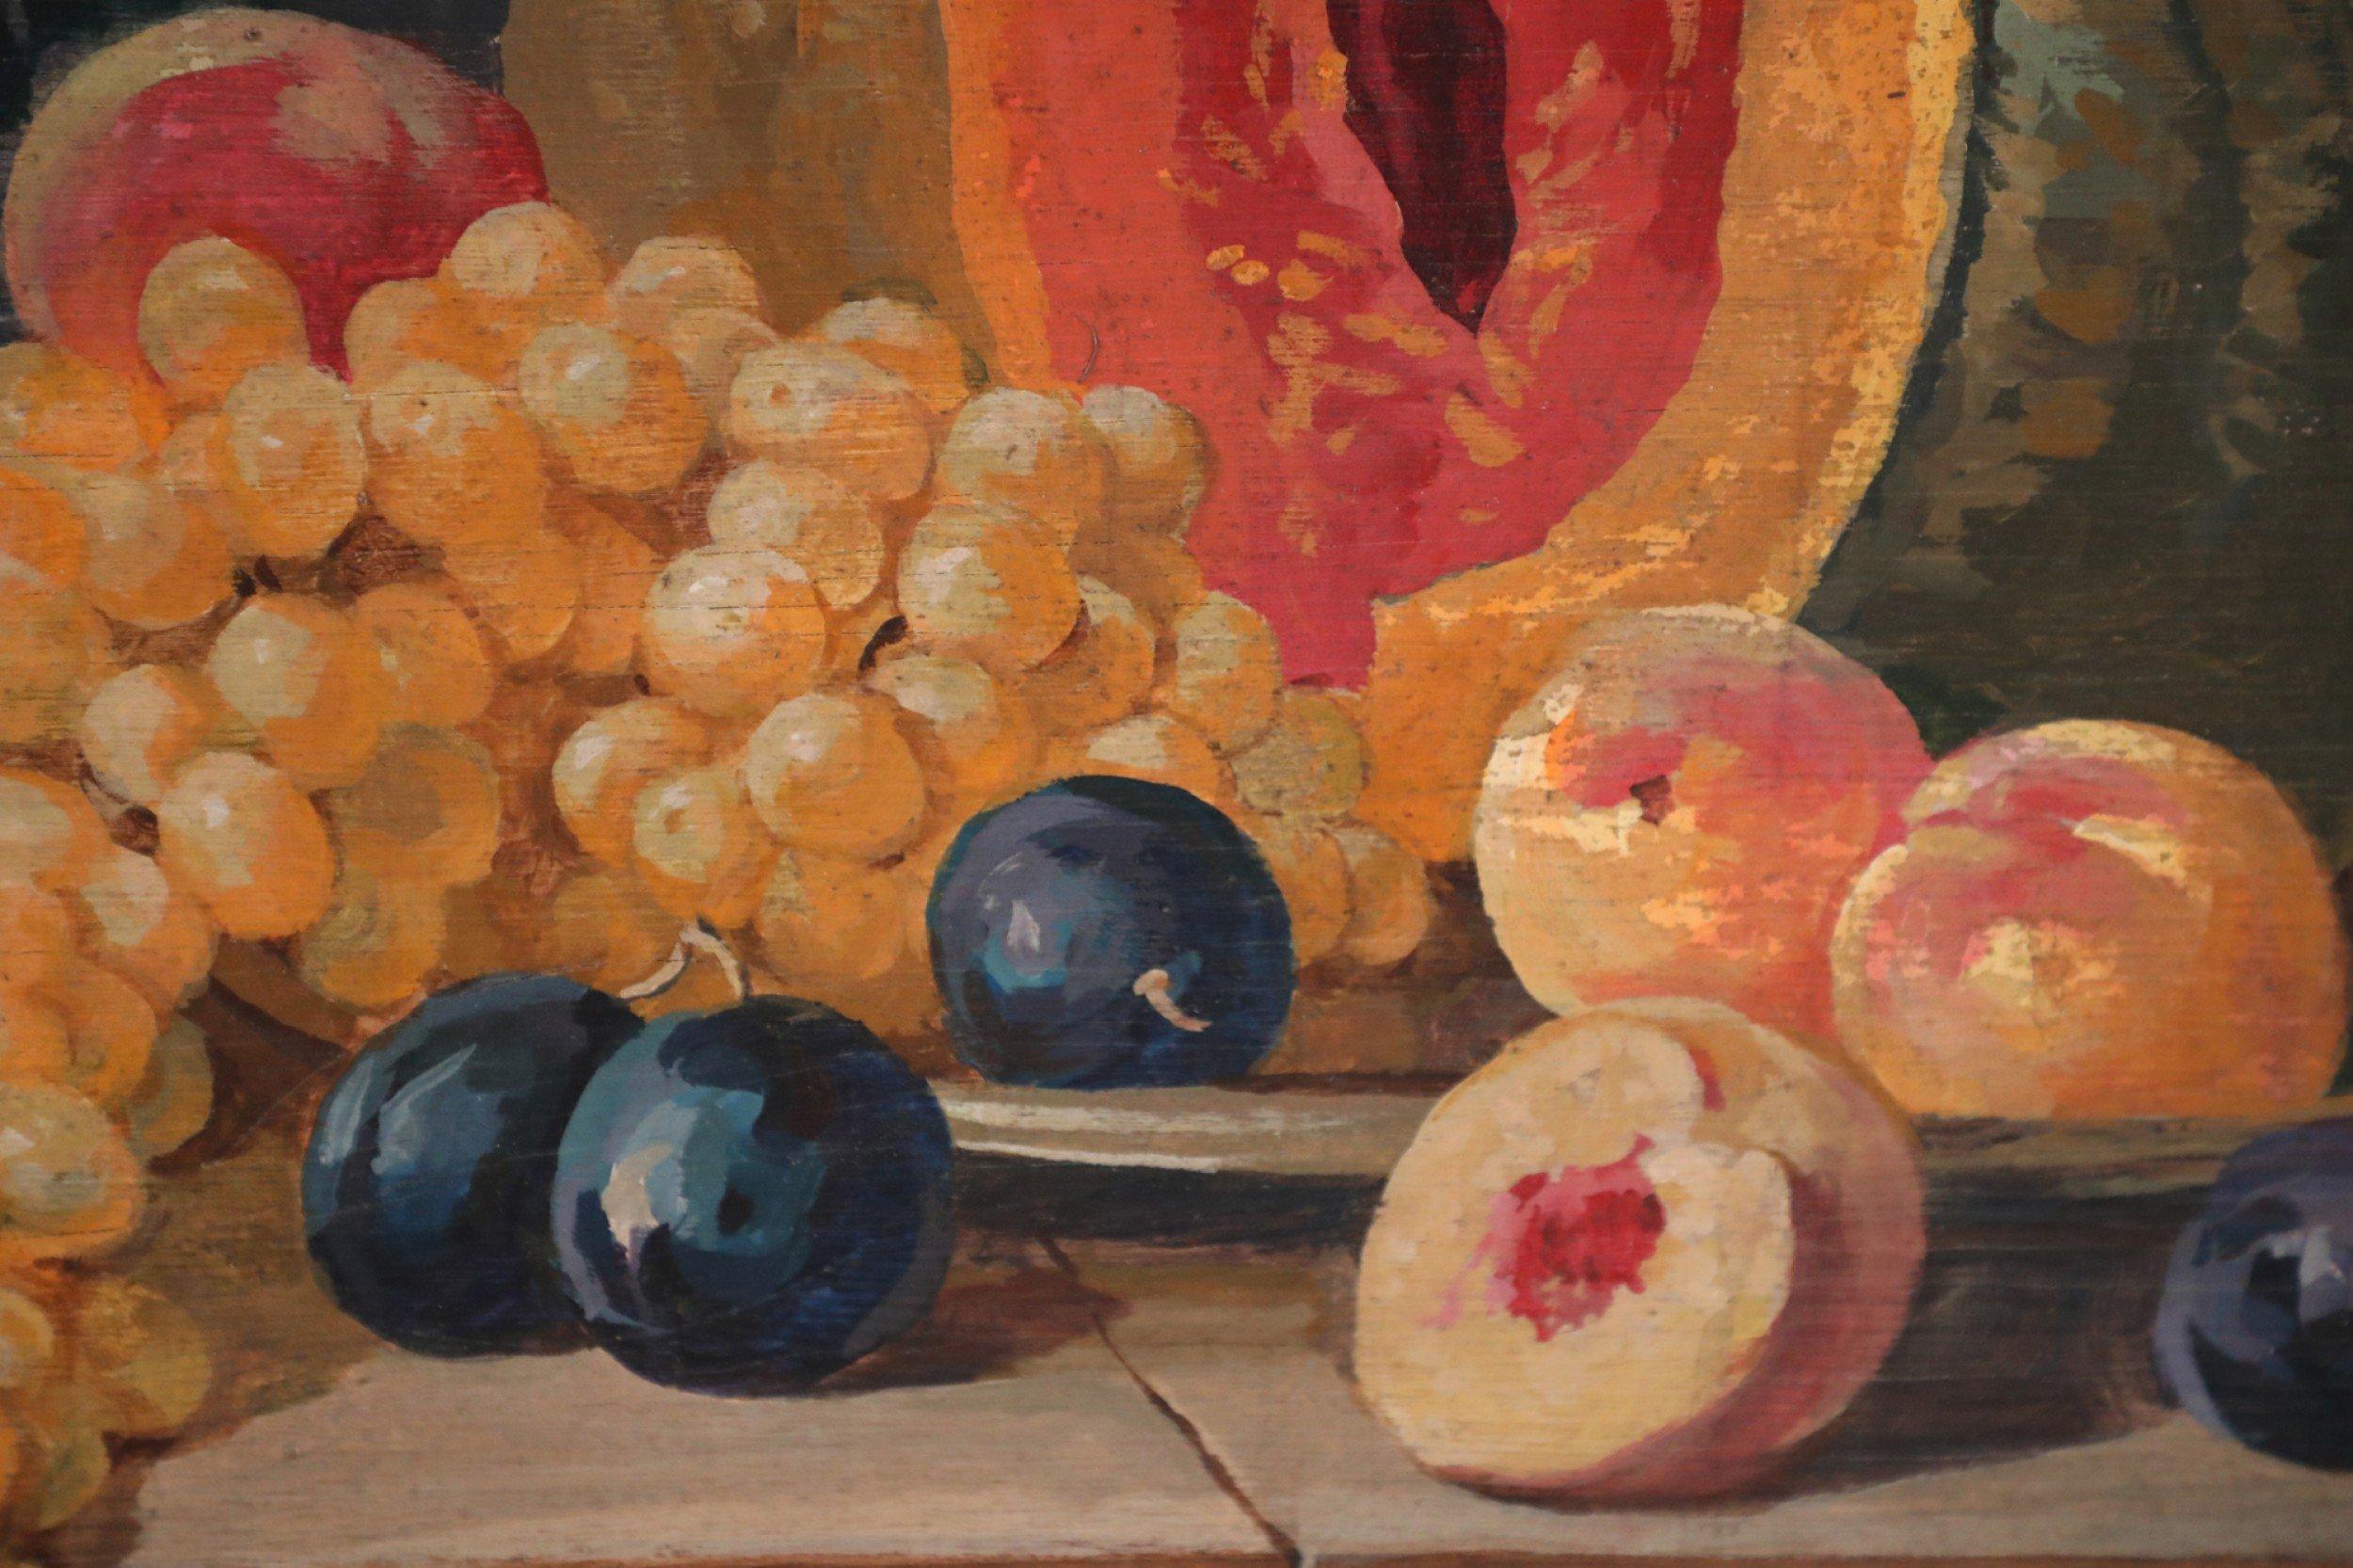 Mid-Century Modern Fruits, Vegetables, and Gold Urn Still Life Painting on Wood For Sale